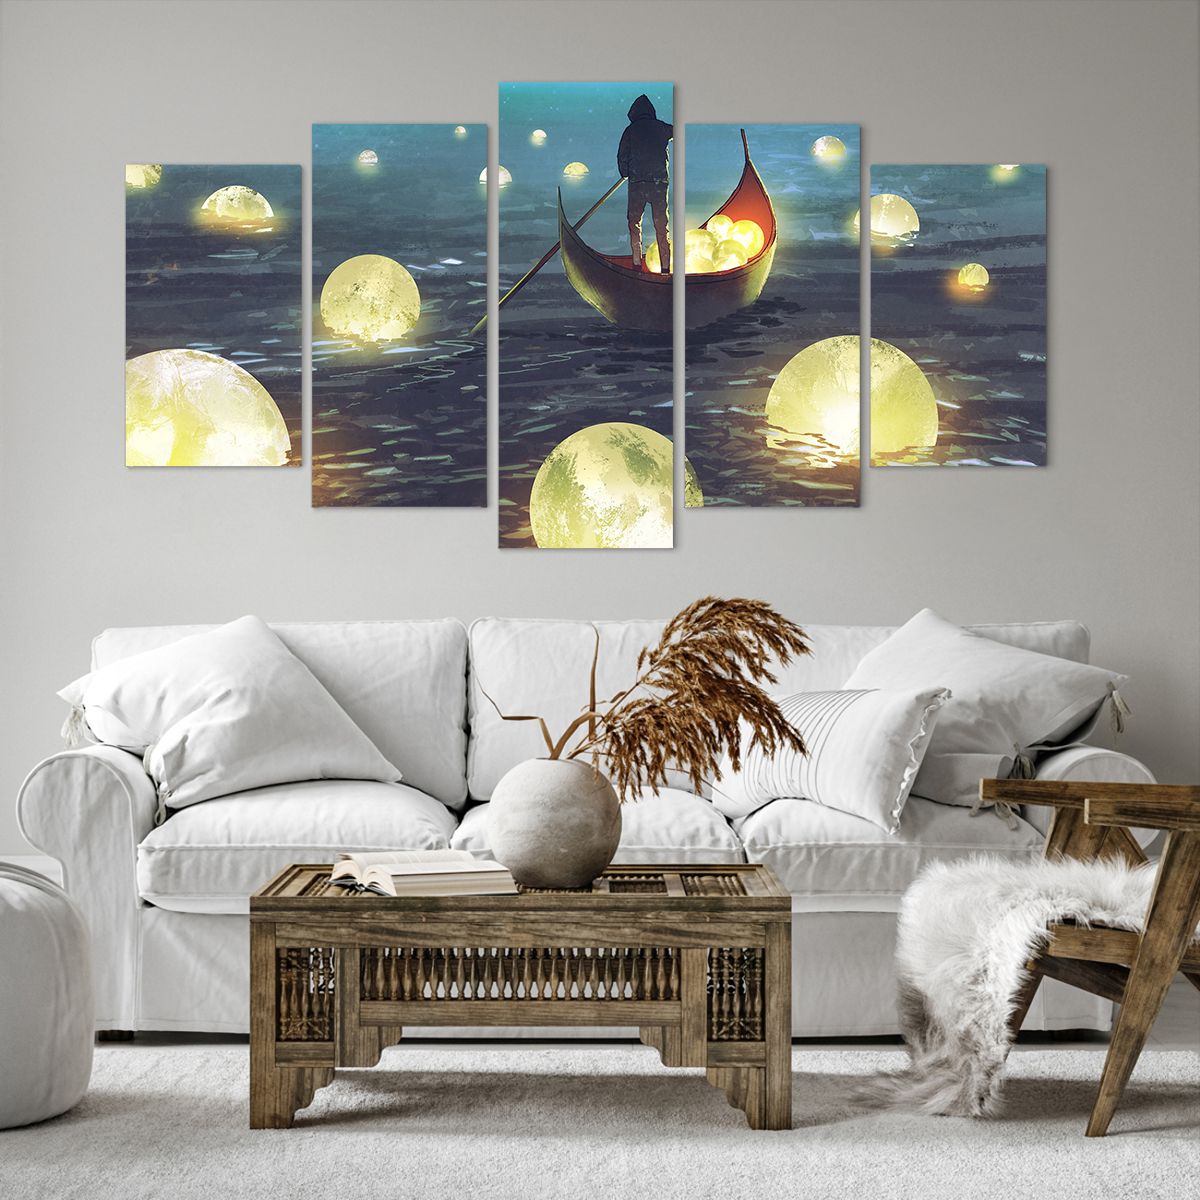 Impression sur toile Abstraction, Impression sur toile Fantaisie, Impression sur toile Bateau, Impression sur toile Pêcheur, Impression sur toile Lune